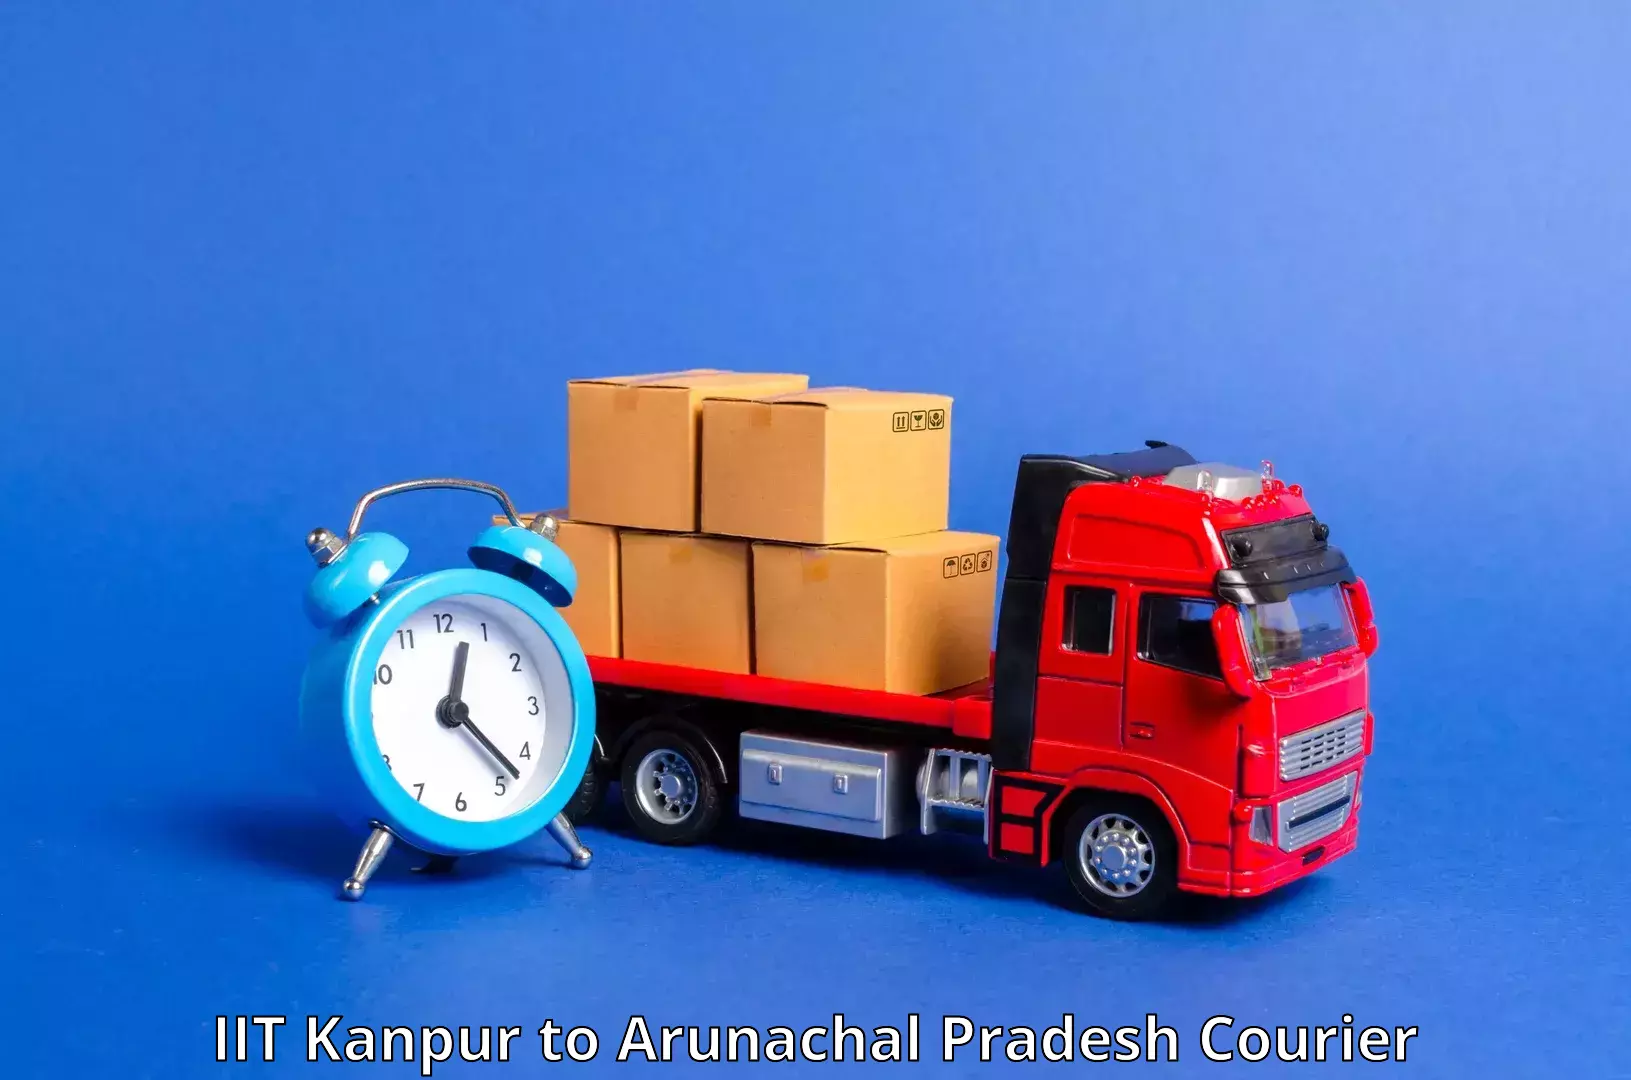 Customer-focused courier IIT Kanpur to Deomali